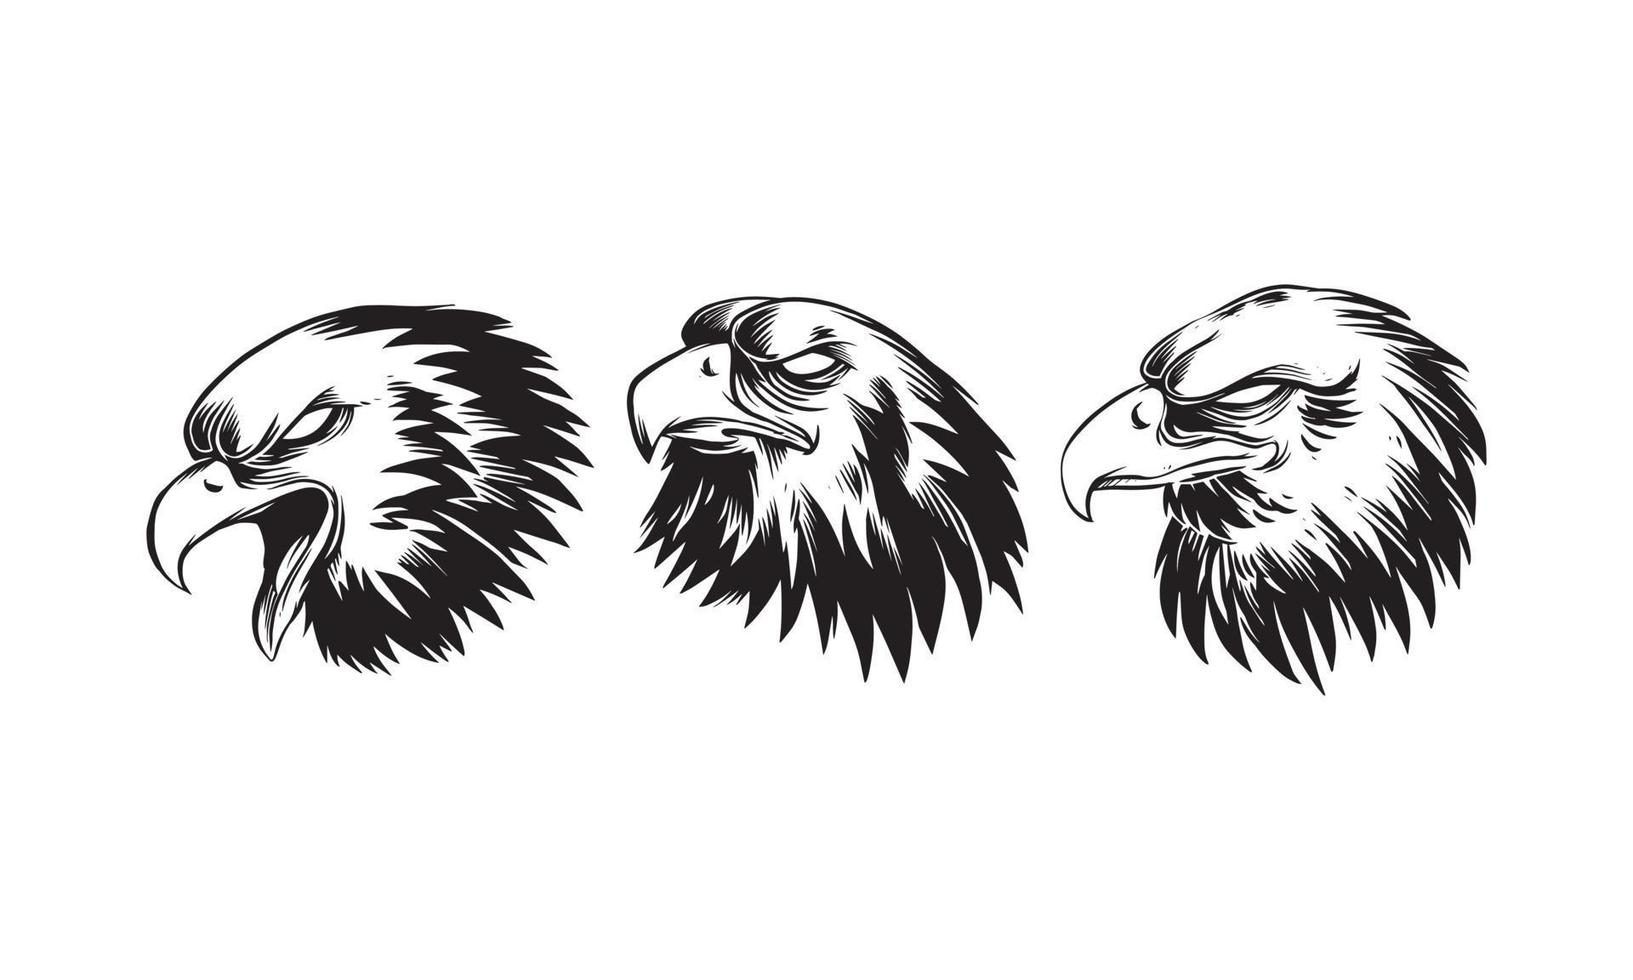 Set of Hand drawn illustration of a dashing eagle head vector